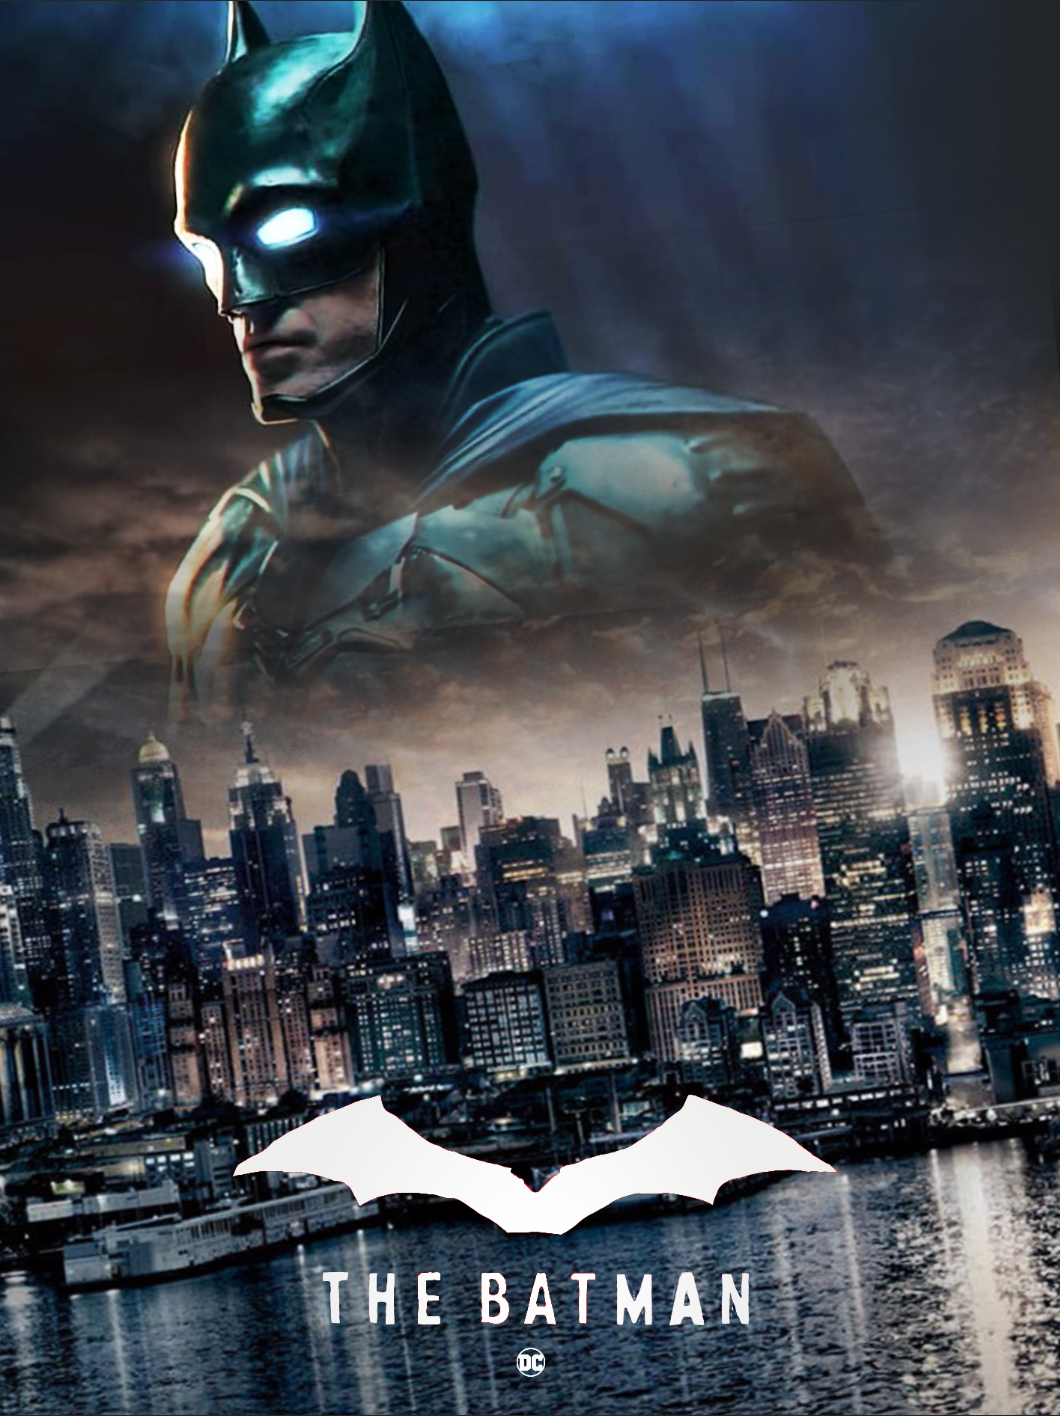 Batman 2021 film movie poster feel free to use in vids